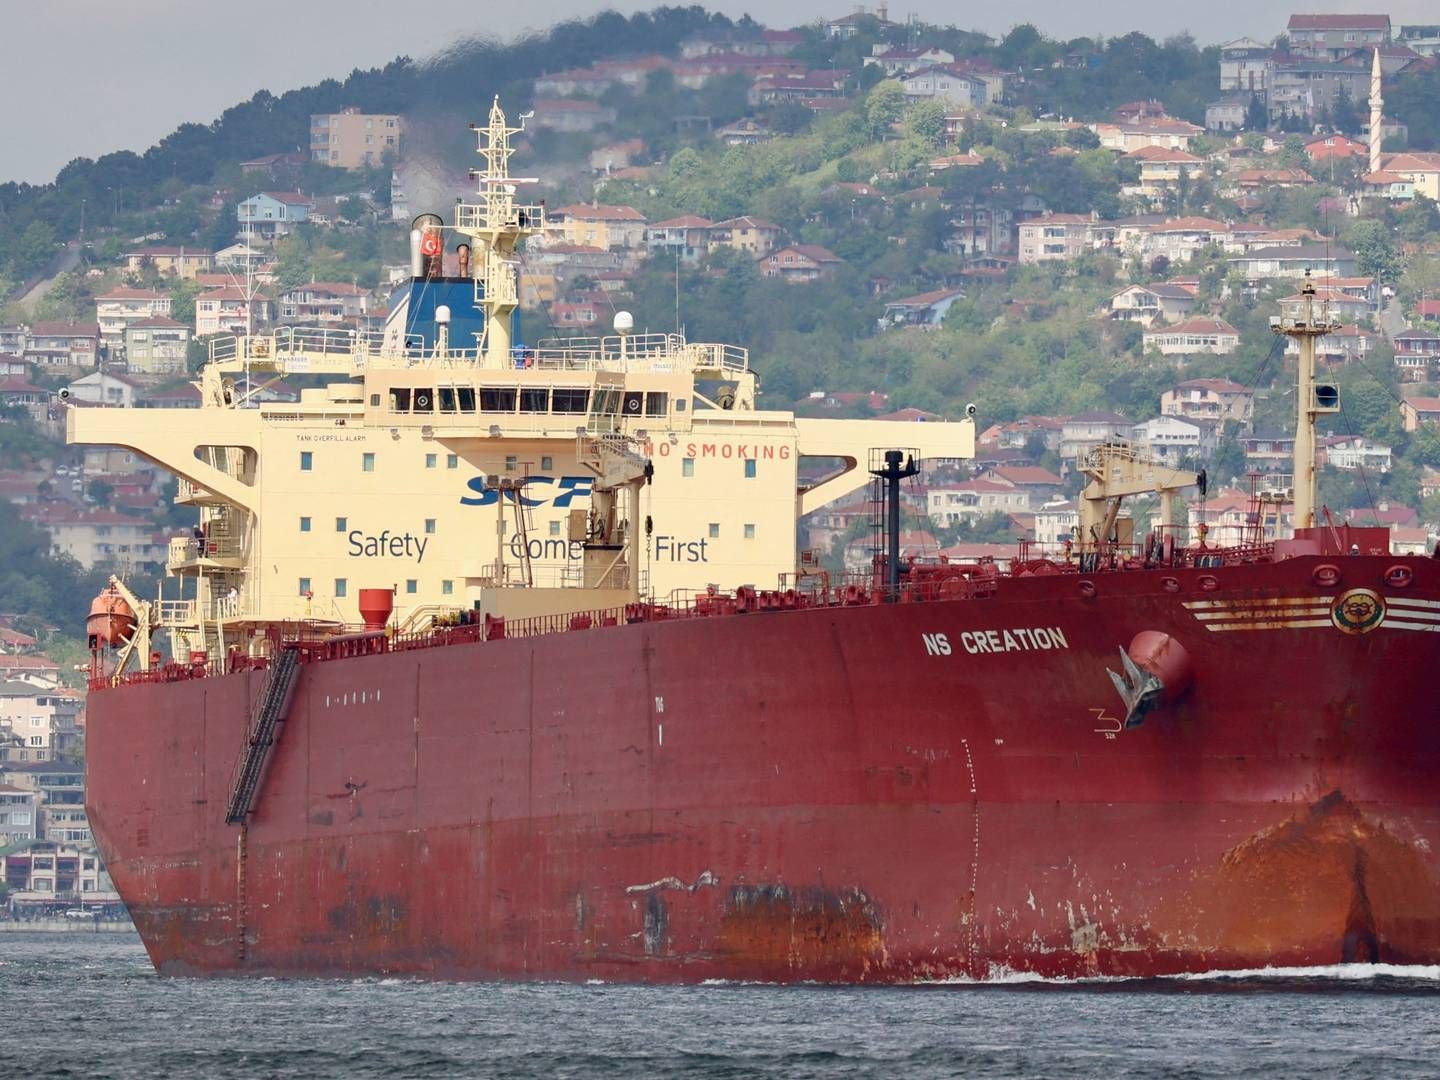 Archive photo. The oil tanker NS Creation is one of Sovcomflot's ships. | Photo: Yoruk Isik/Reuters/Ritzau Scanpix